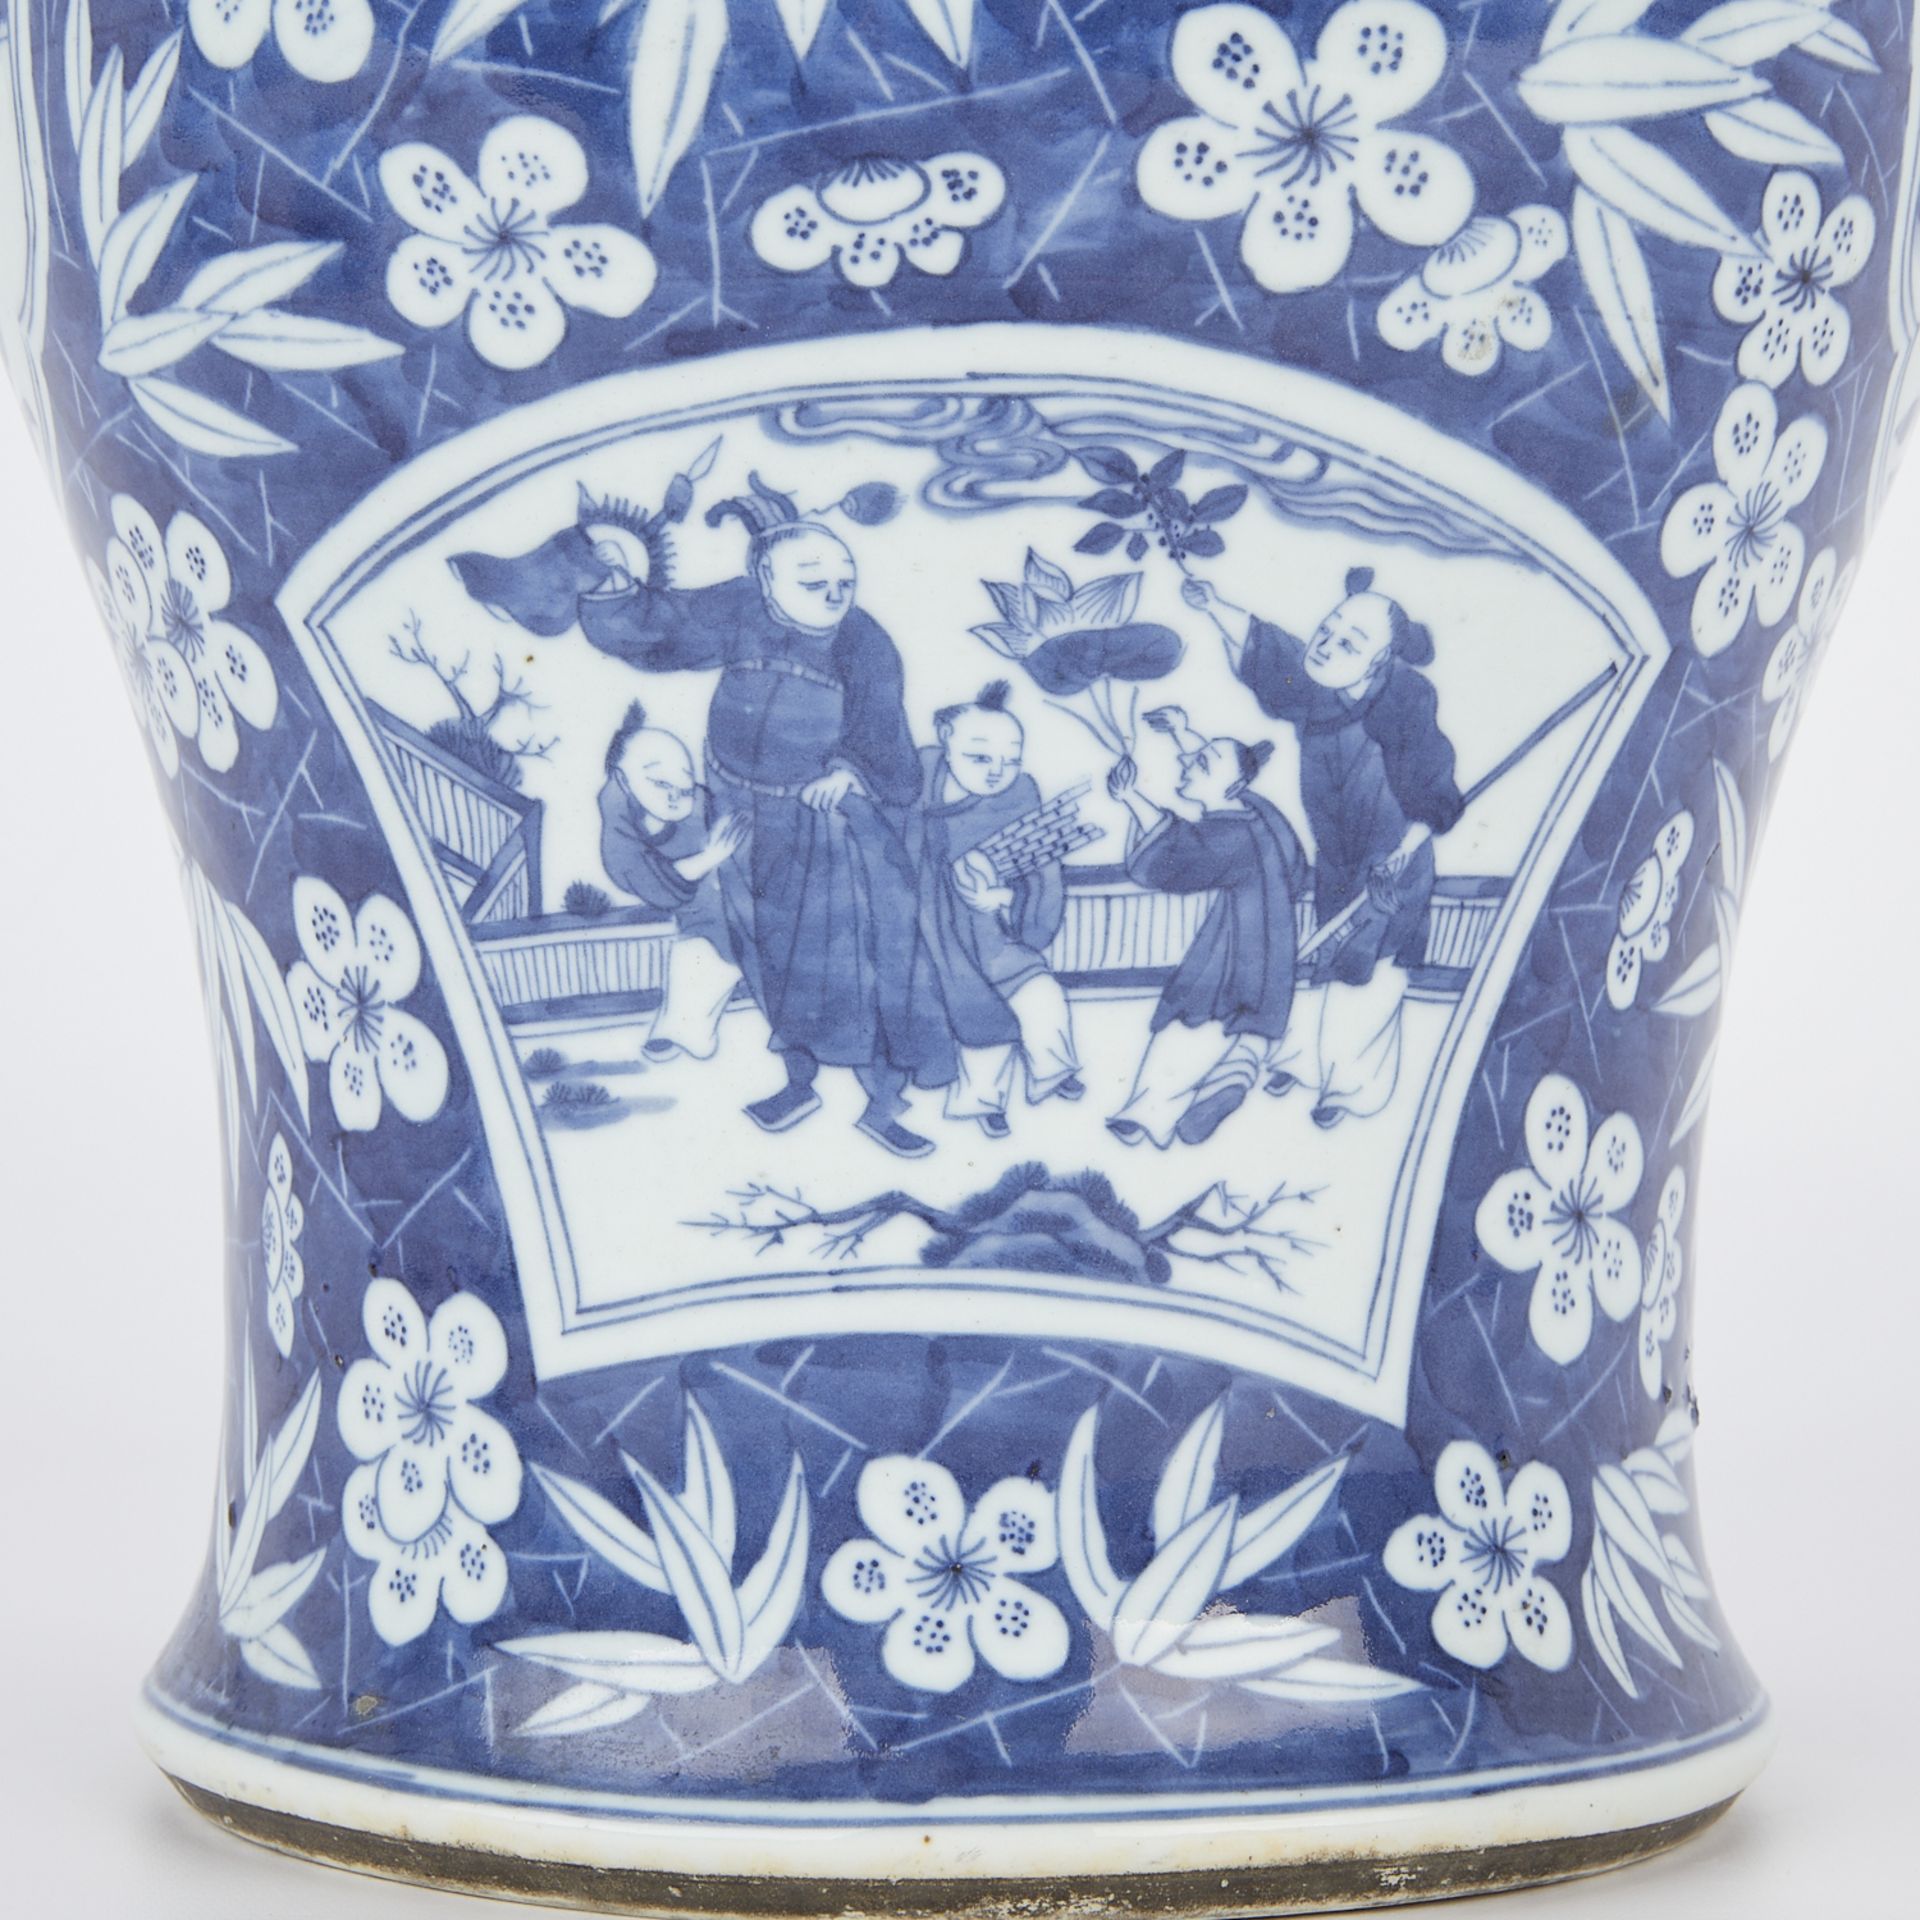 18th/19th c. Chinese B&W Porcelain Baluster Vase - Image 10 of 15